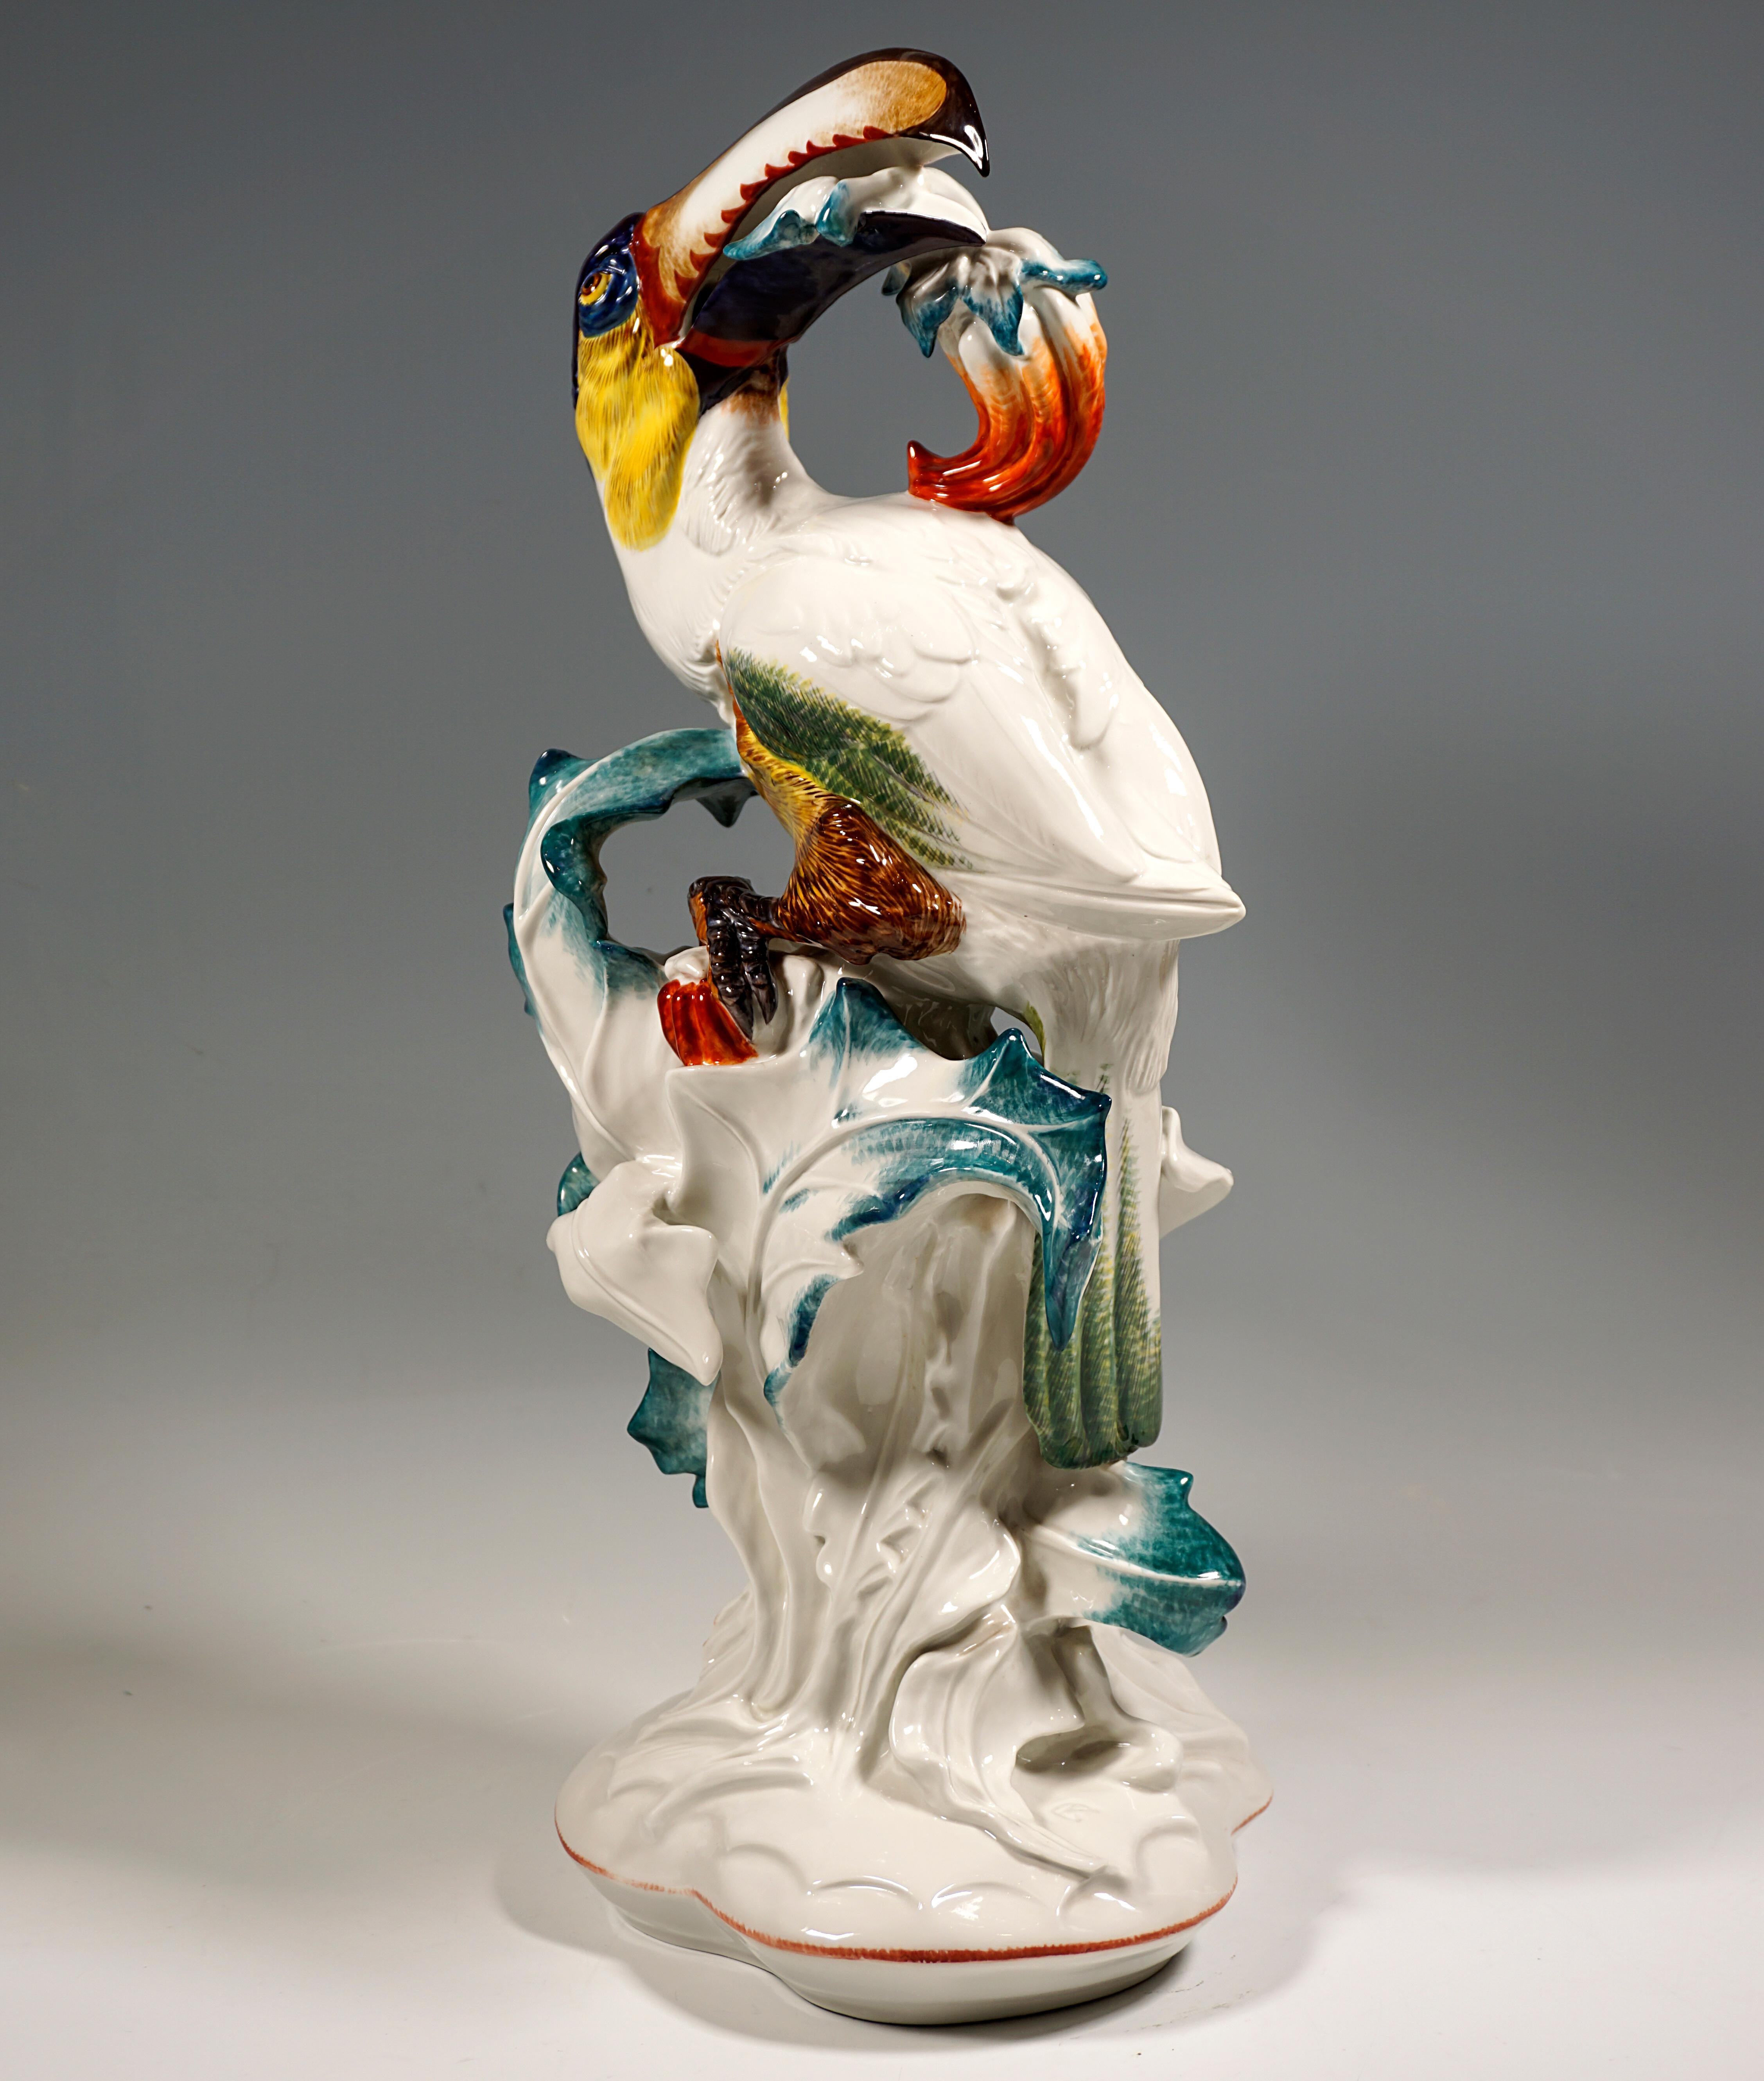 Highly decorative depiction of a life-size peppereater with its head turned backwards and a fruit in its beak, clinging to a leafy plant.
Painted with strong color accents, on a trefoil base with a red border and artist's mark 'PW' next to the tuft